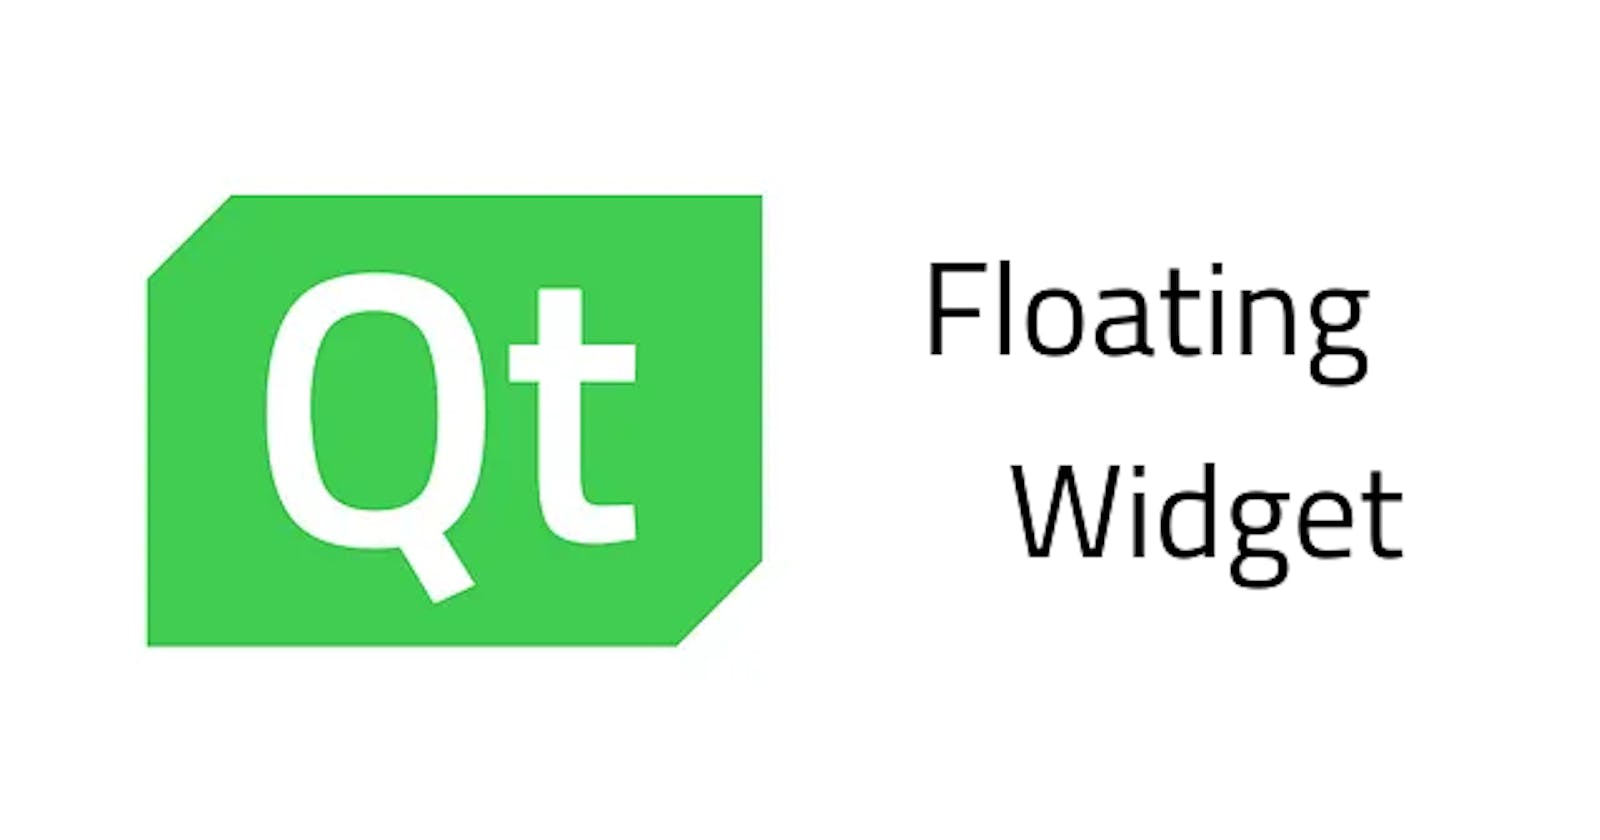 How to make a floating widget in Qt